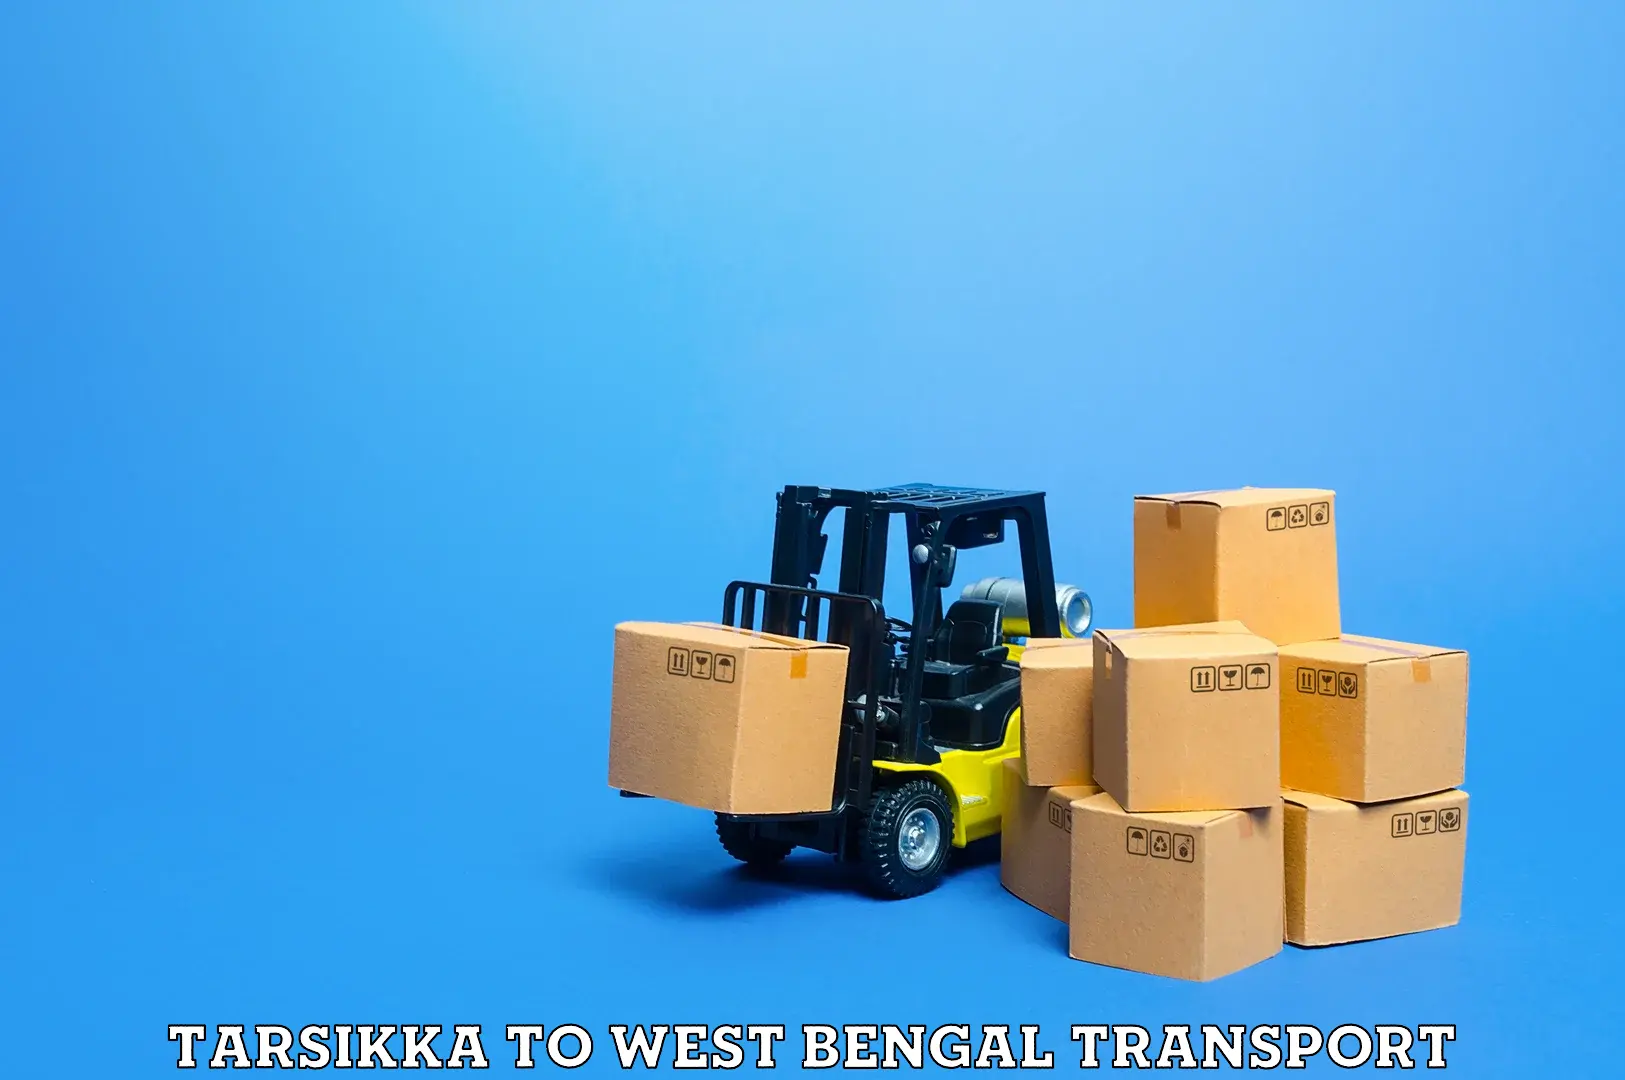 Land transport services Tarsikka to West Bengal